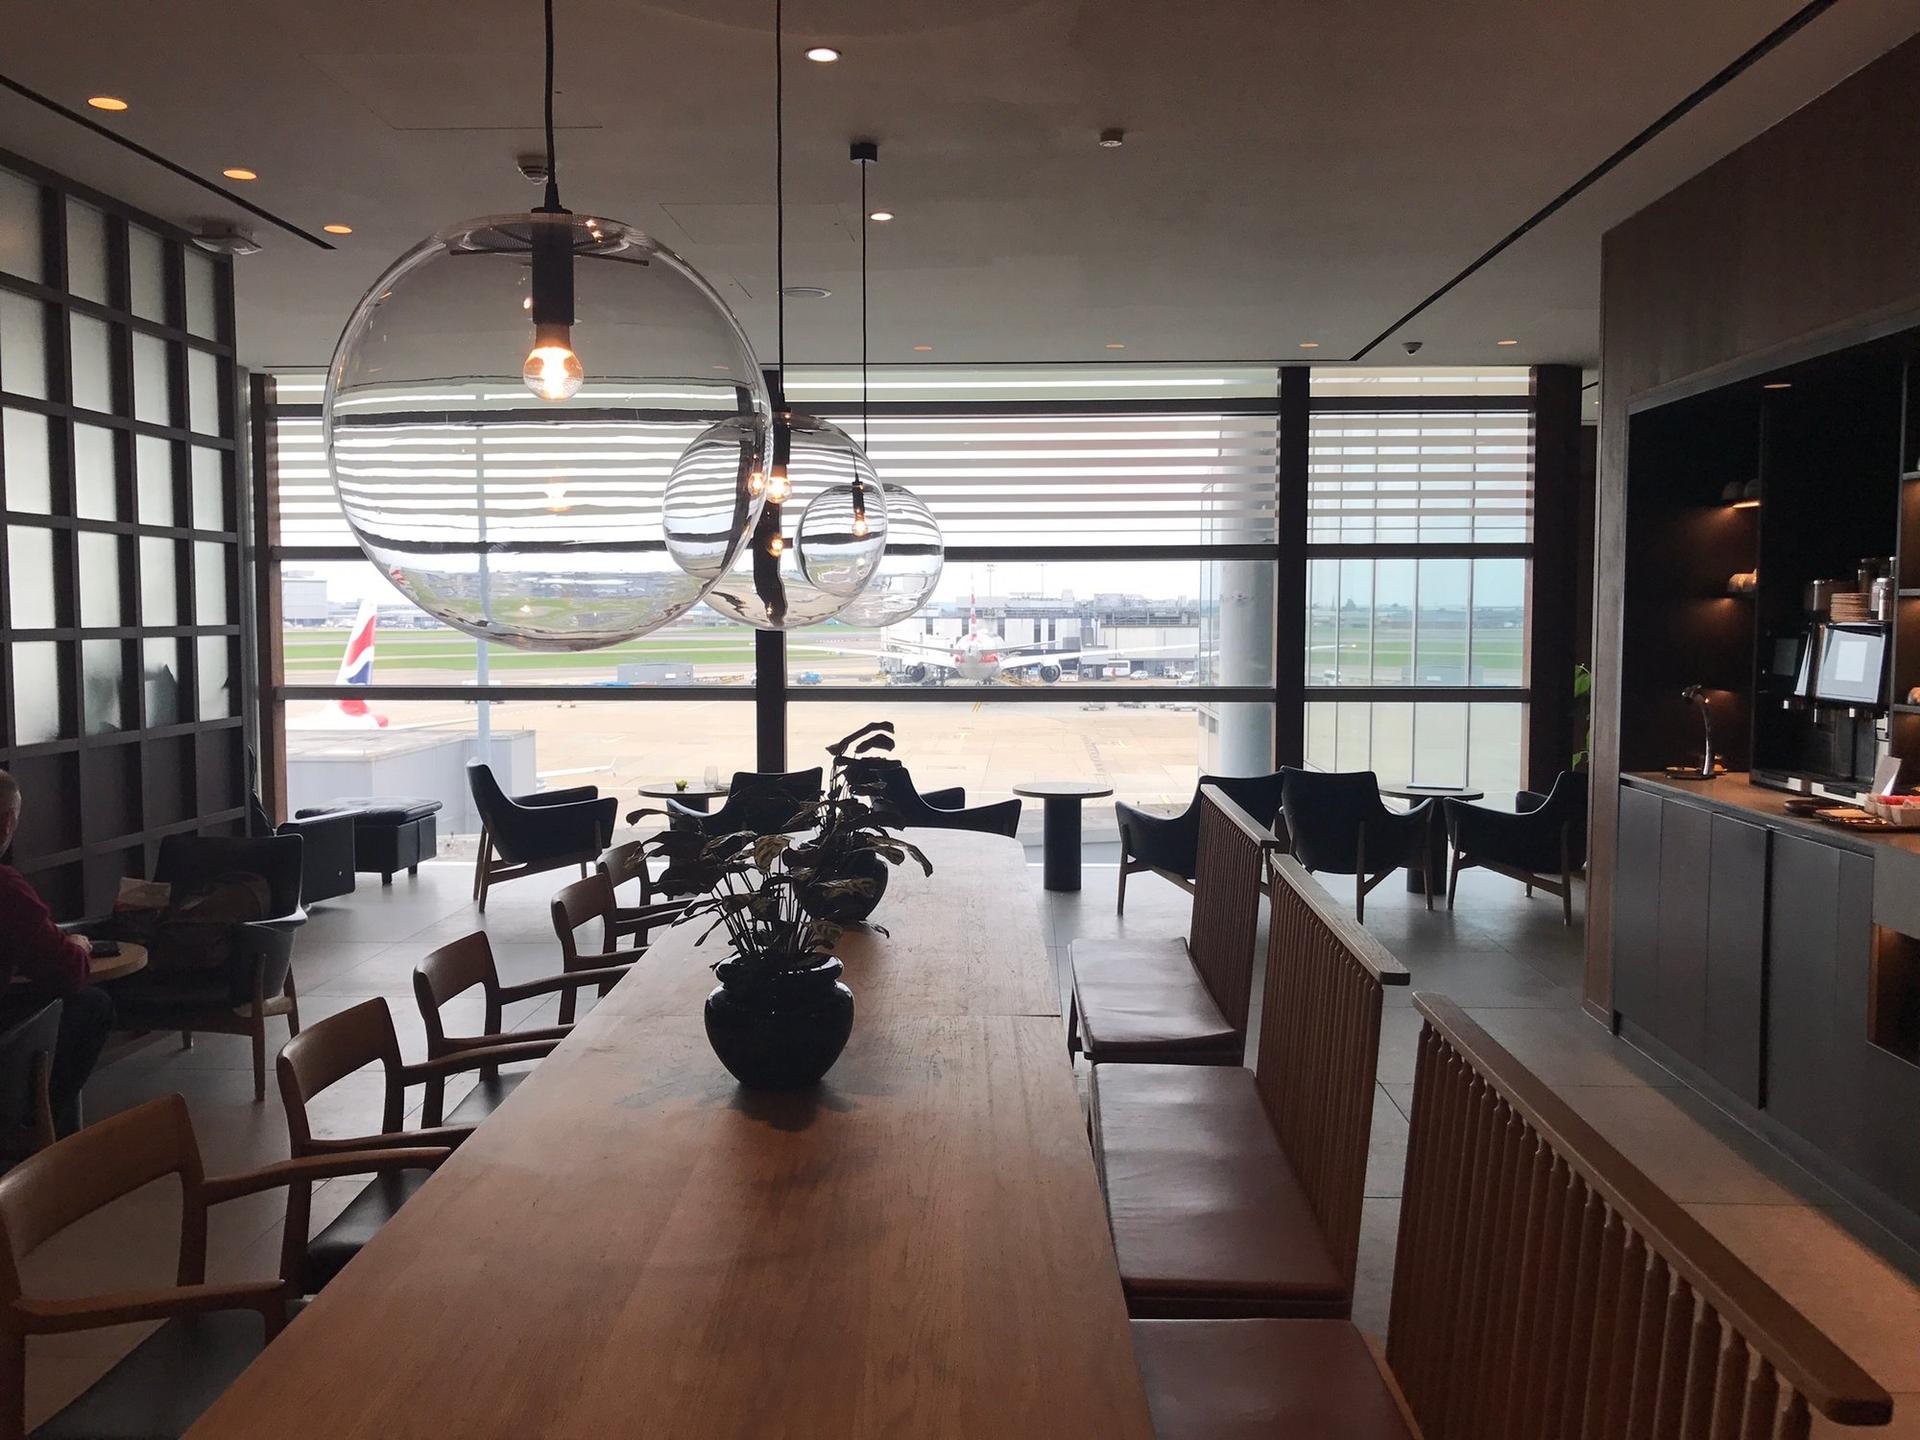 Cathay Pacific Business Class Lounge image 35 of 48